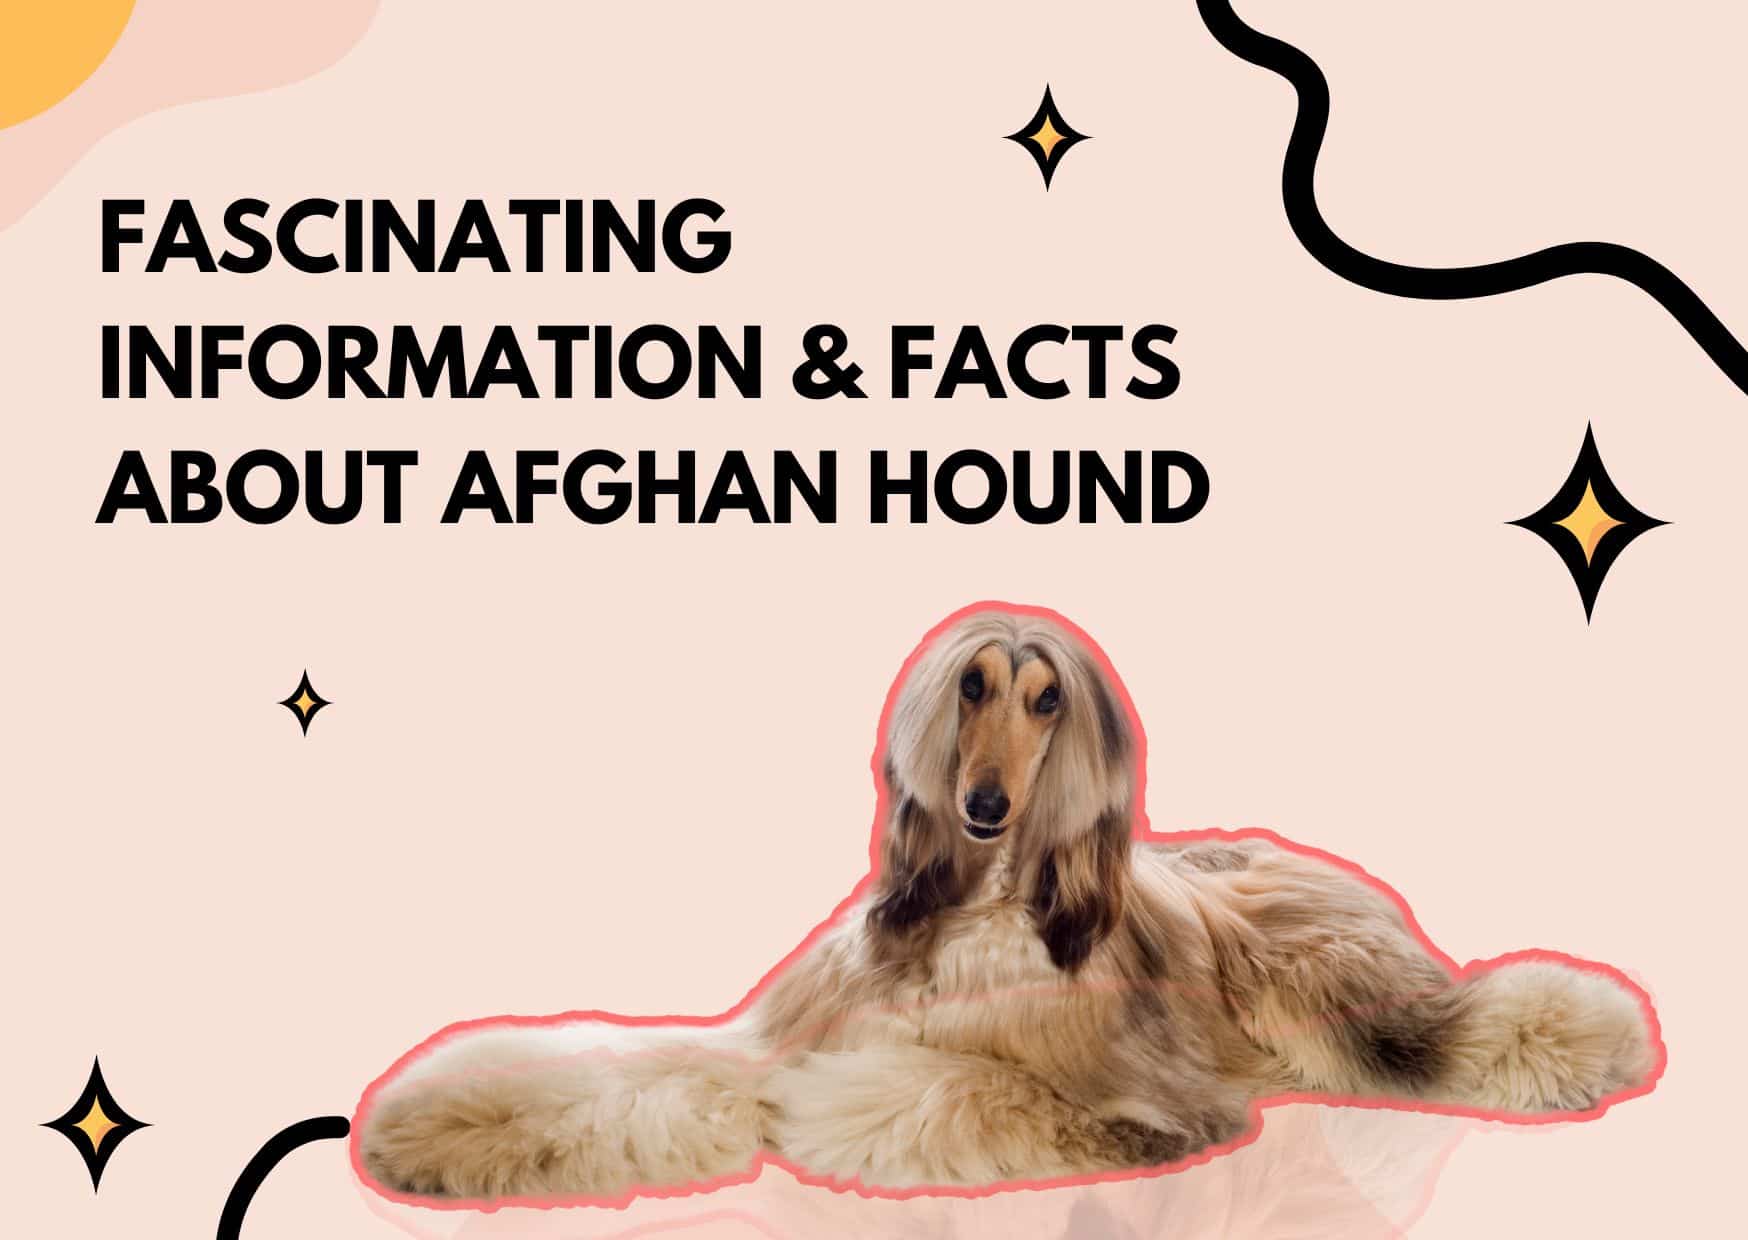 Fascinating Information & Facts About Afghan Hound